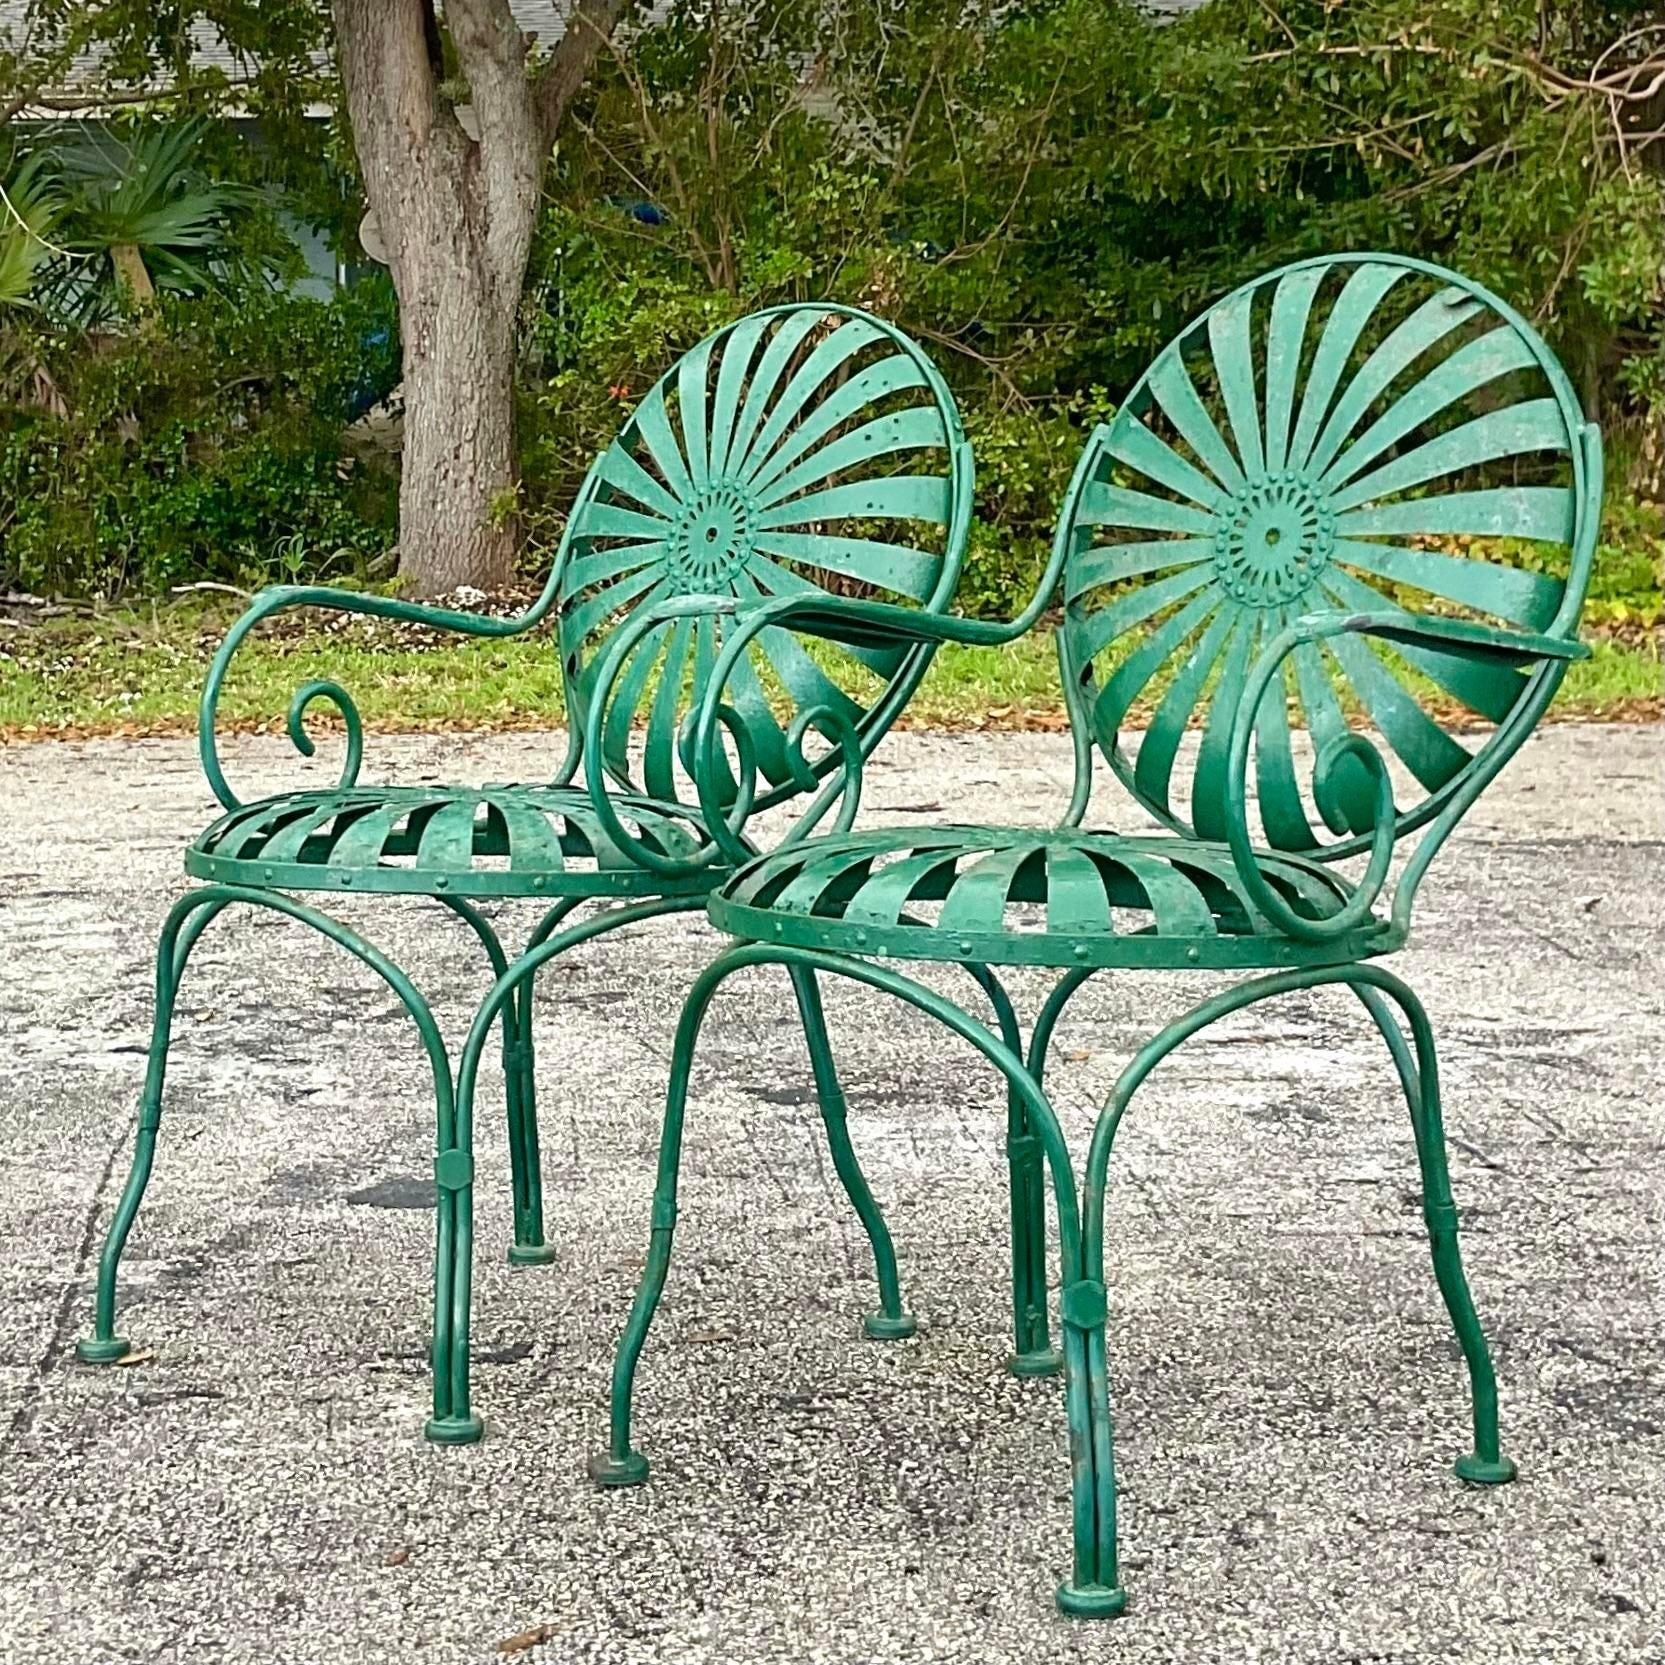 A fabulous pair of vintage Coastal arm chairs. Made by the iconic Francois Carre. Unmarked. His famous Sunburst design with radiating spokes. Acquired from a Palm Beach estate.